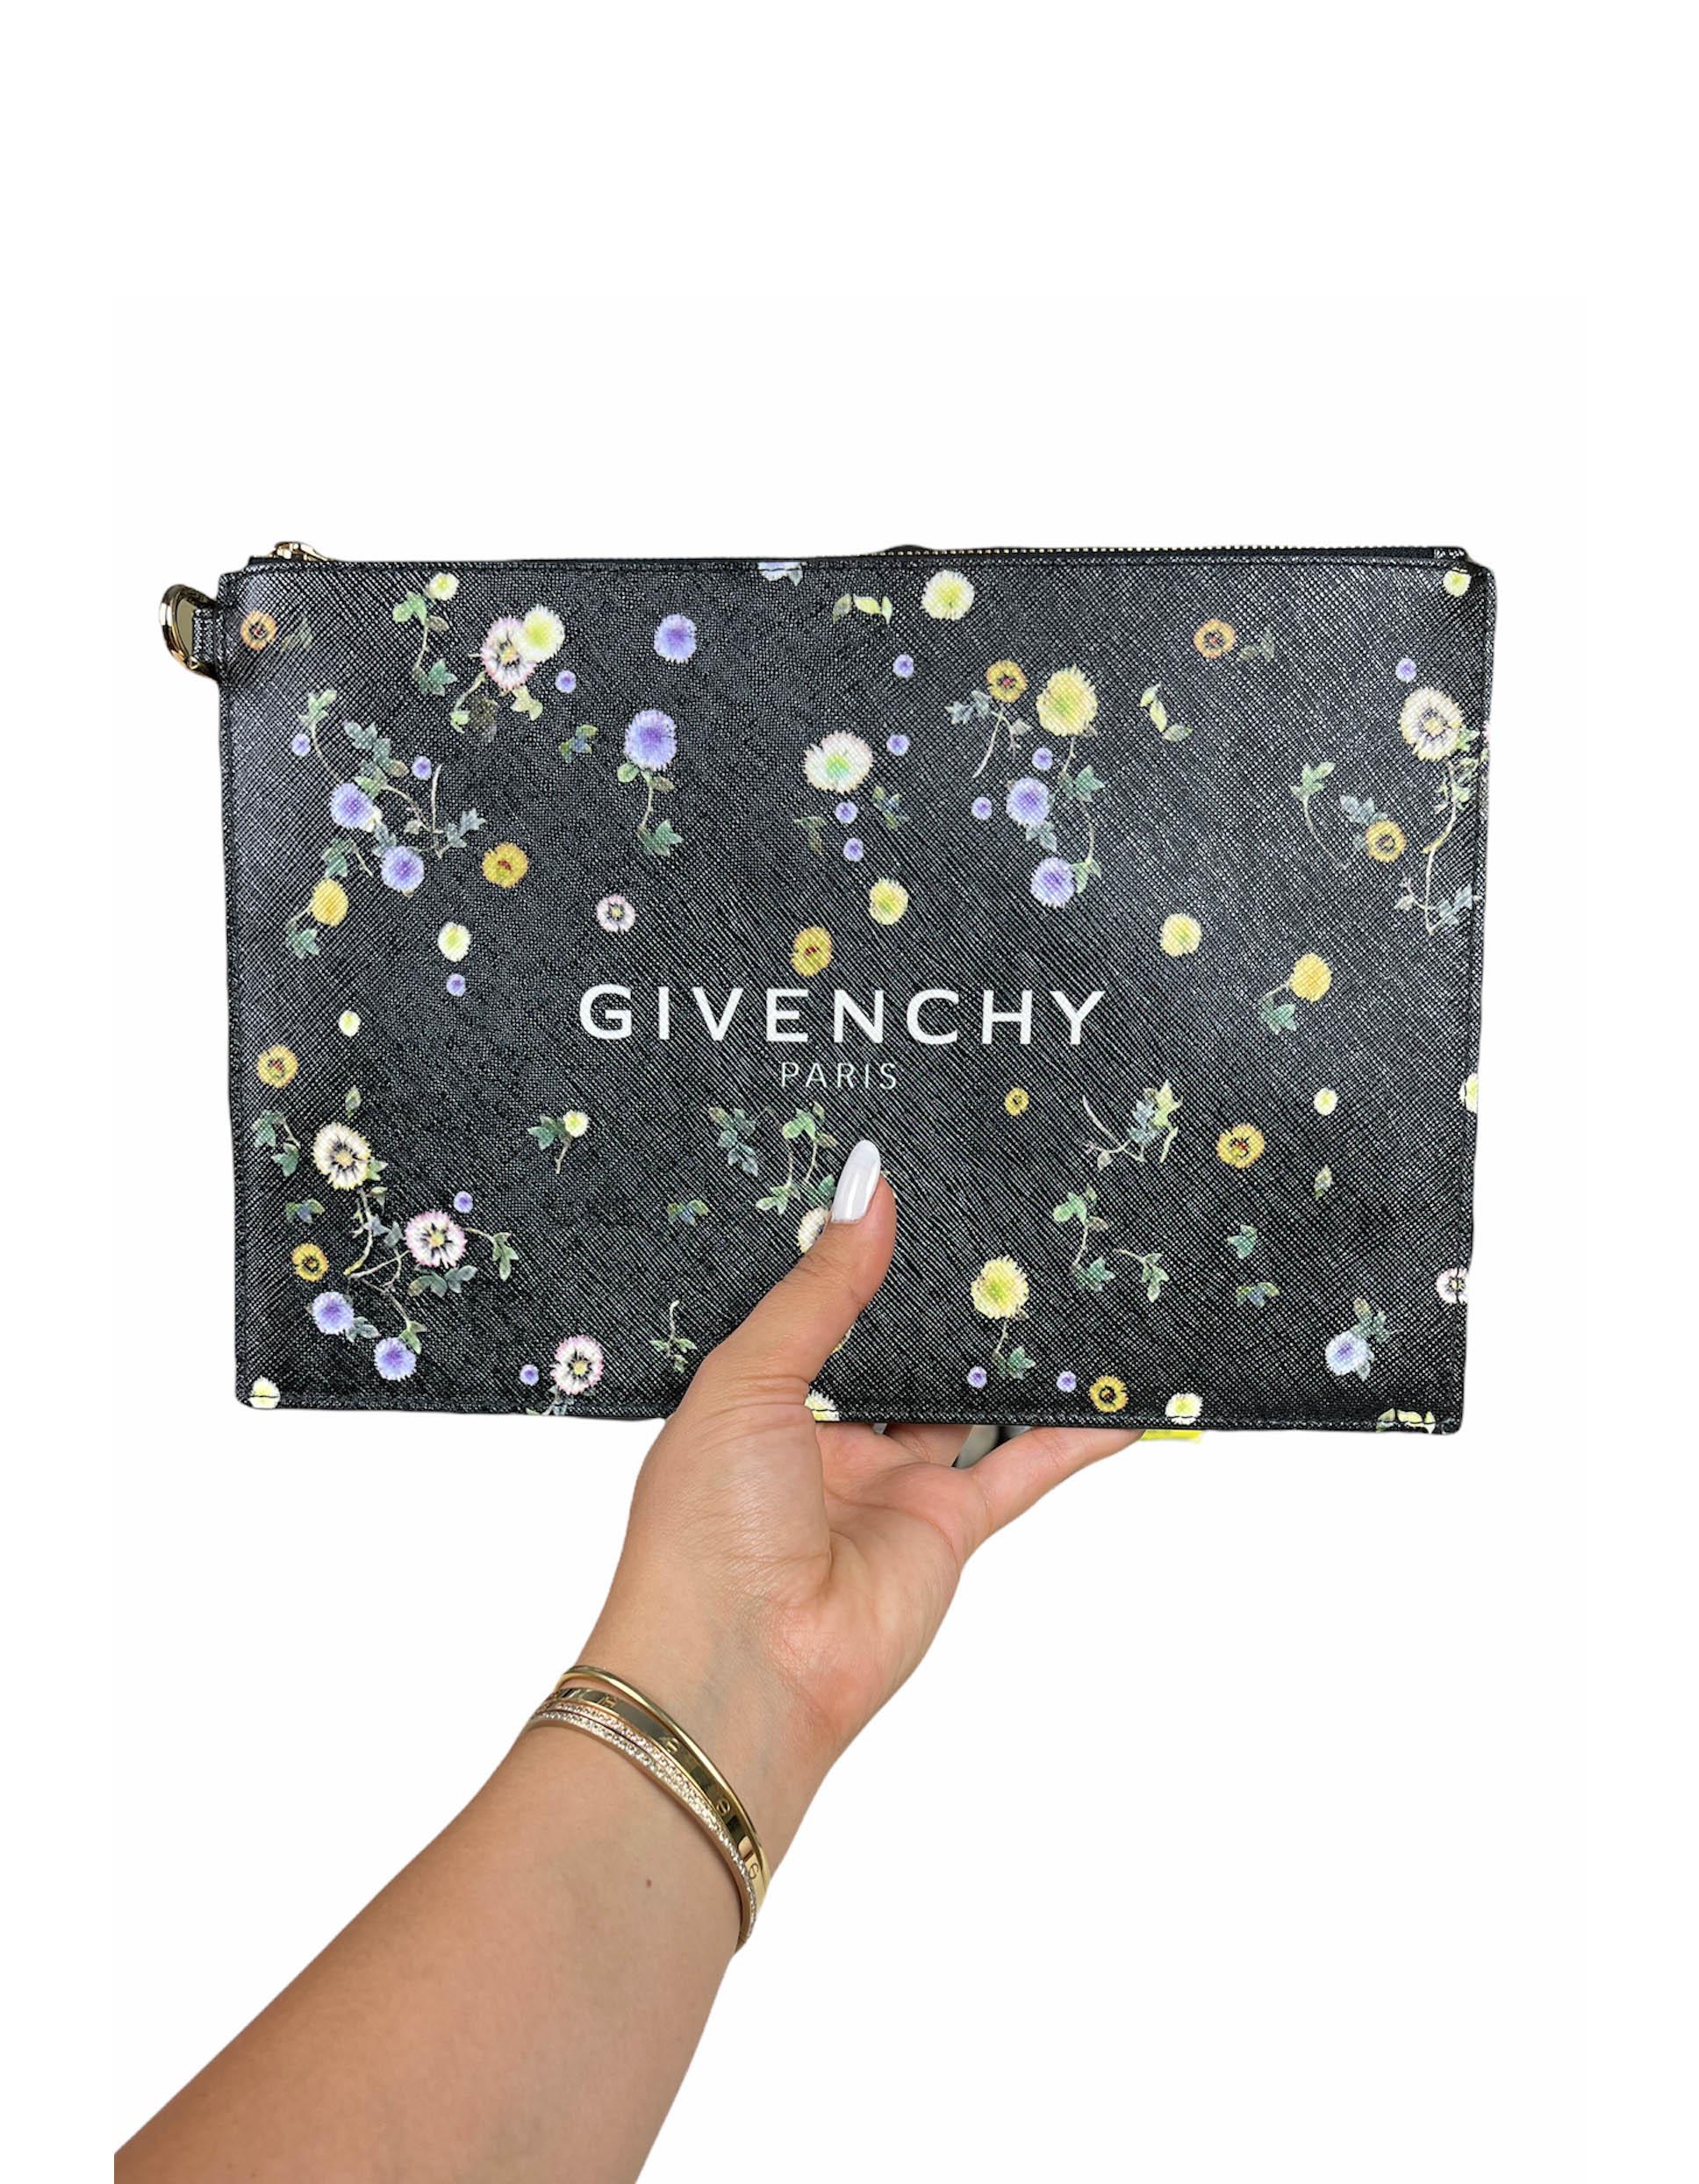 Givenchy Black Leather Floral Printed Logo Large Pouch Bag

Made In: Italy
Year of Production: 2019
Color: Black and multicolor
Hardware: Goldtone
Materials: Grained leather
Lining: Black textile
Closure/Opening: Zip top
Interior Pockets: One flat